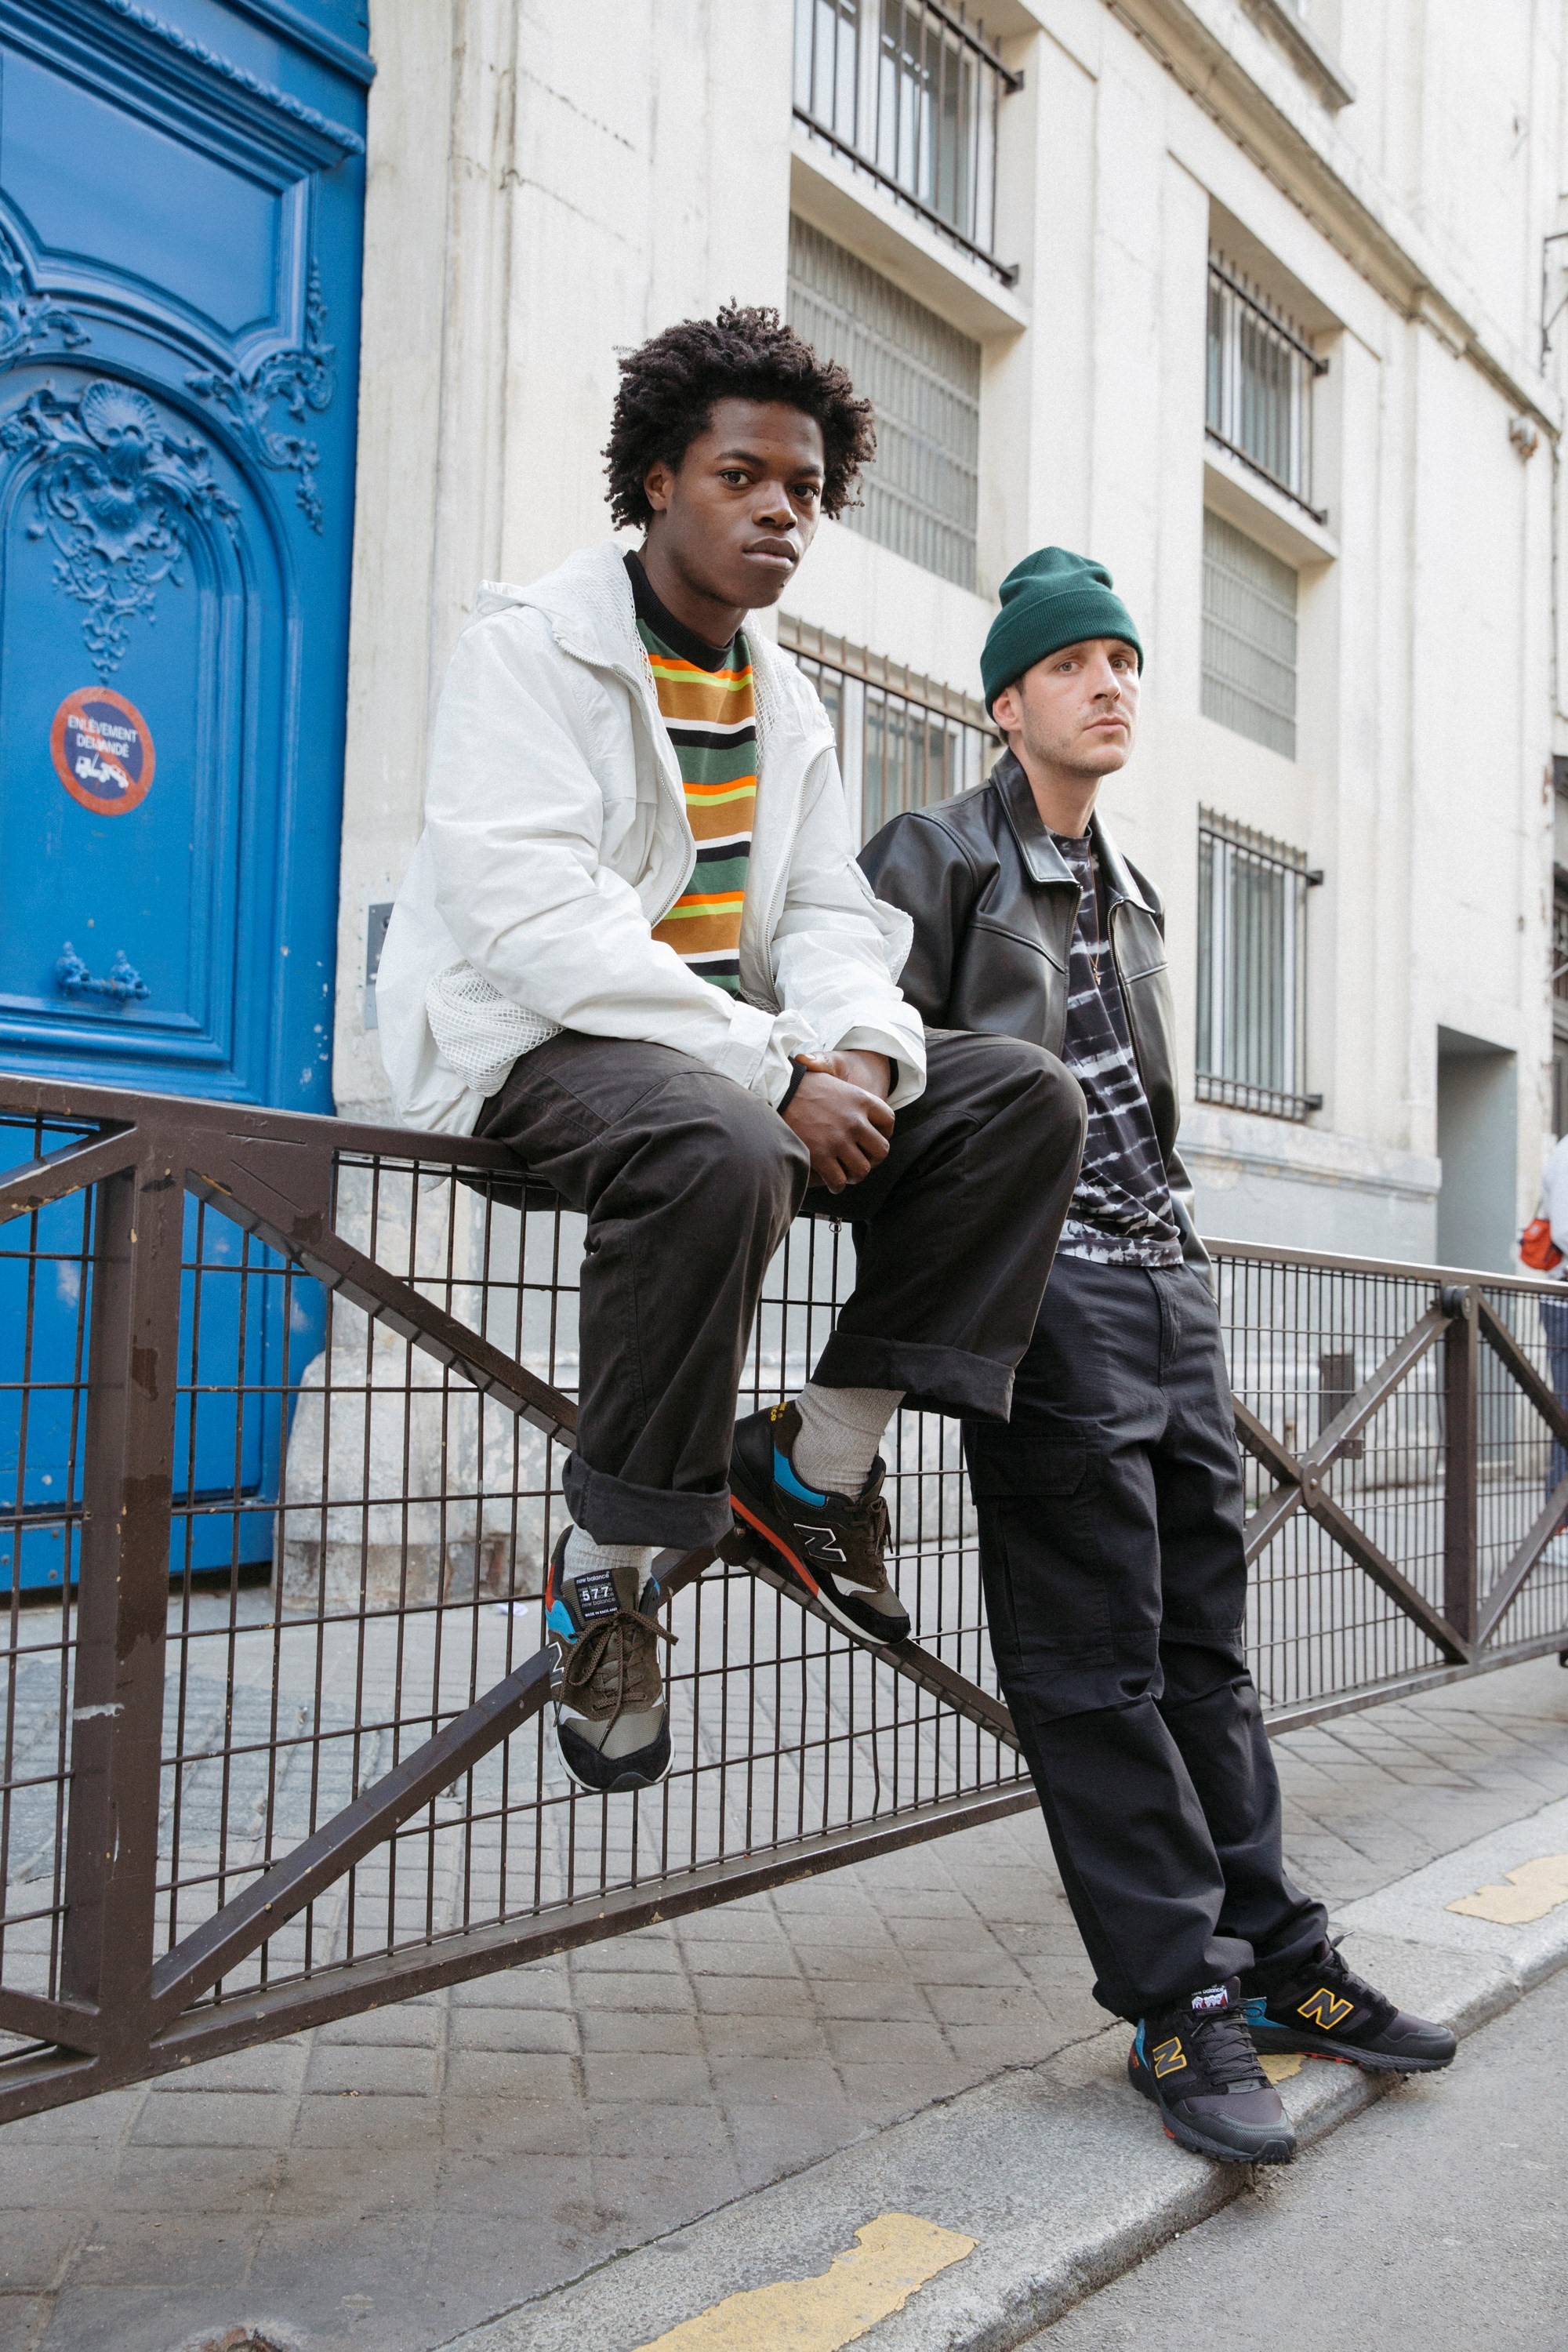 Moskee Beginner Subjectief New Balance shoot its latest collection on the streets of Paris | Dazed